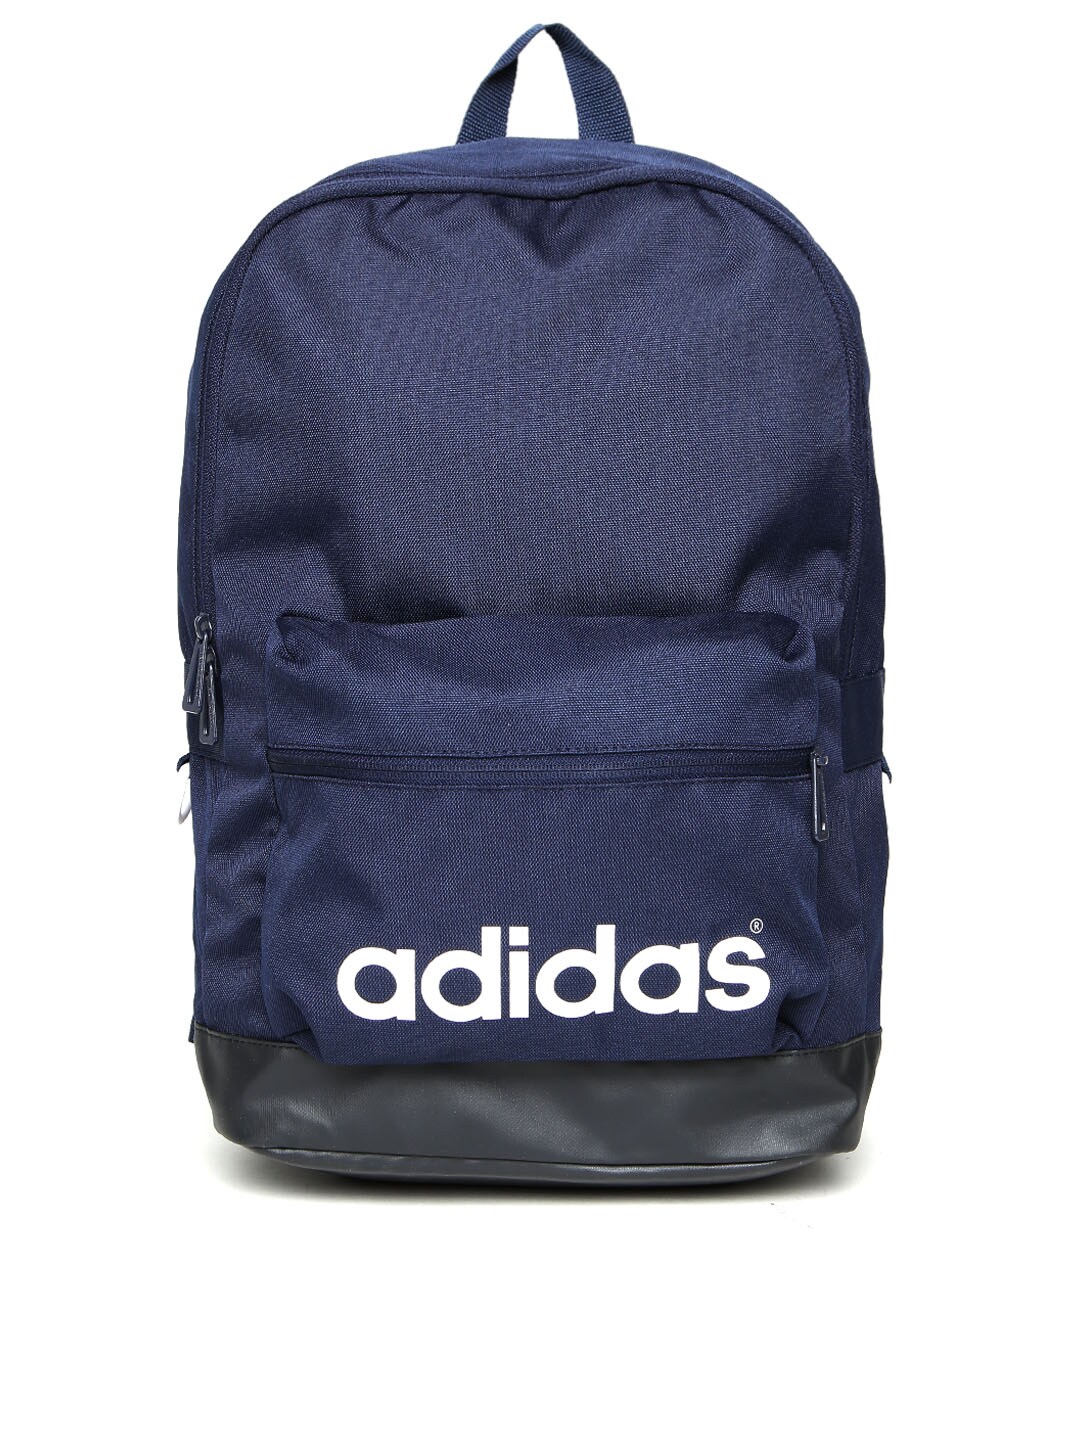 adidas neo backpack cheap online